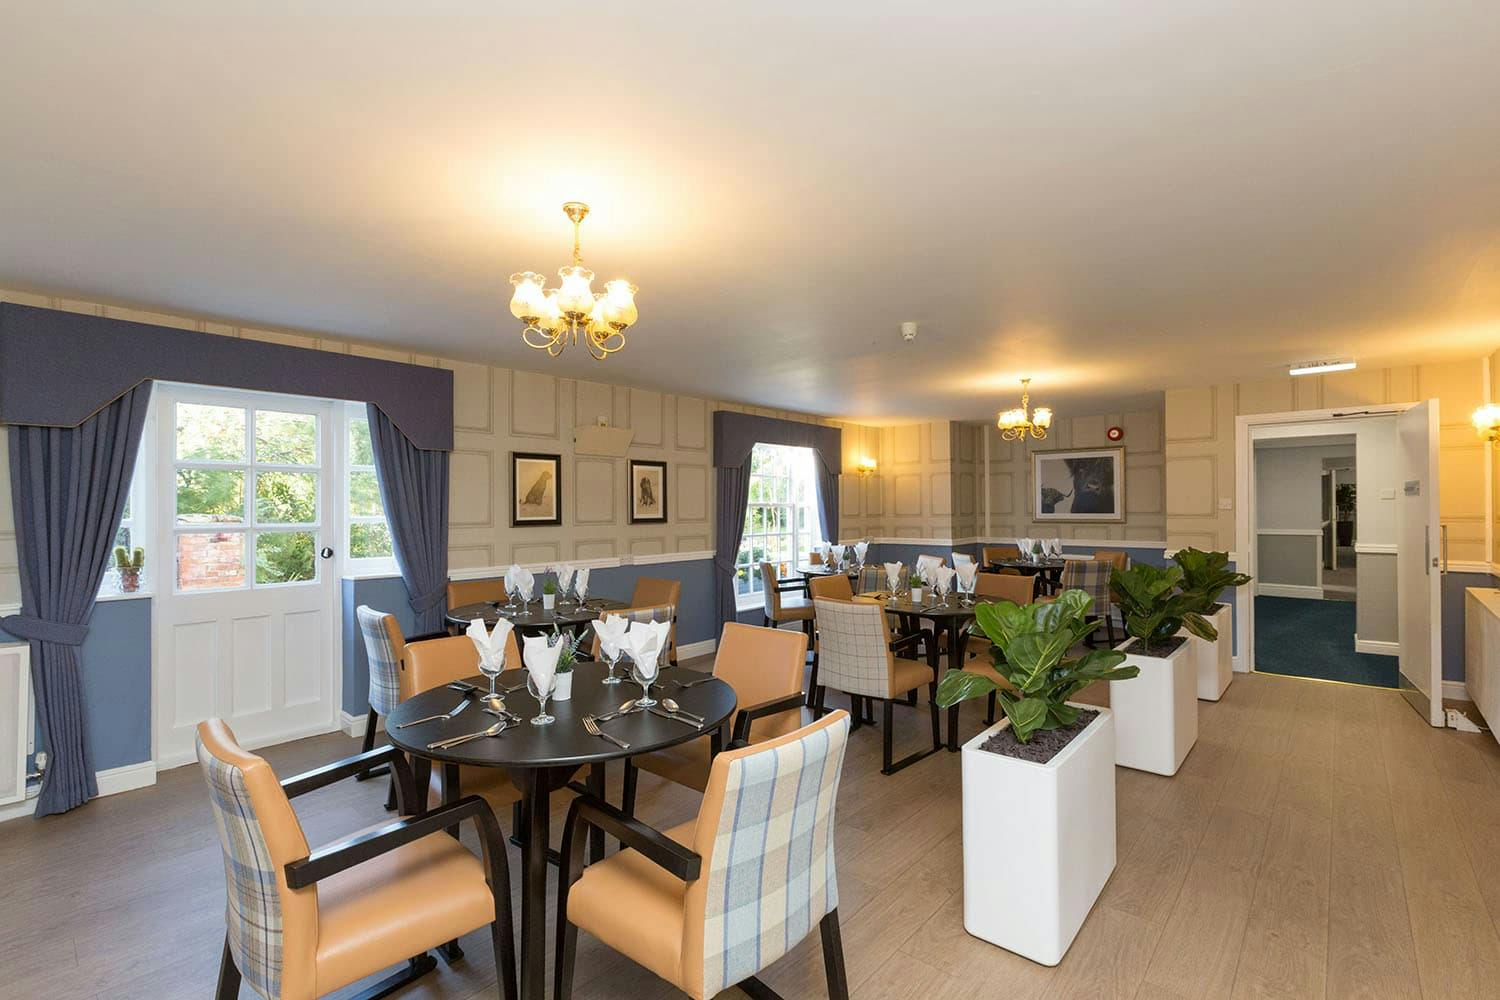 Dining Area at Beech House Care Home in Market Drayton, Shropshire